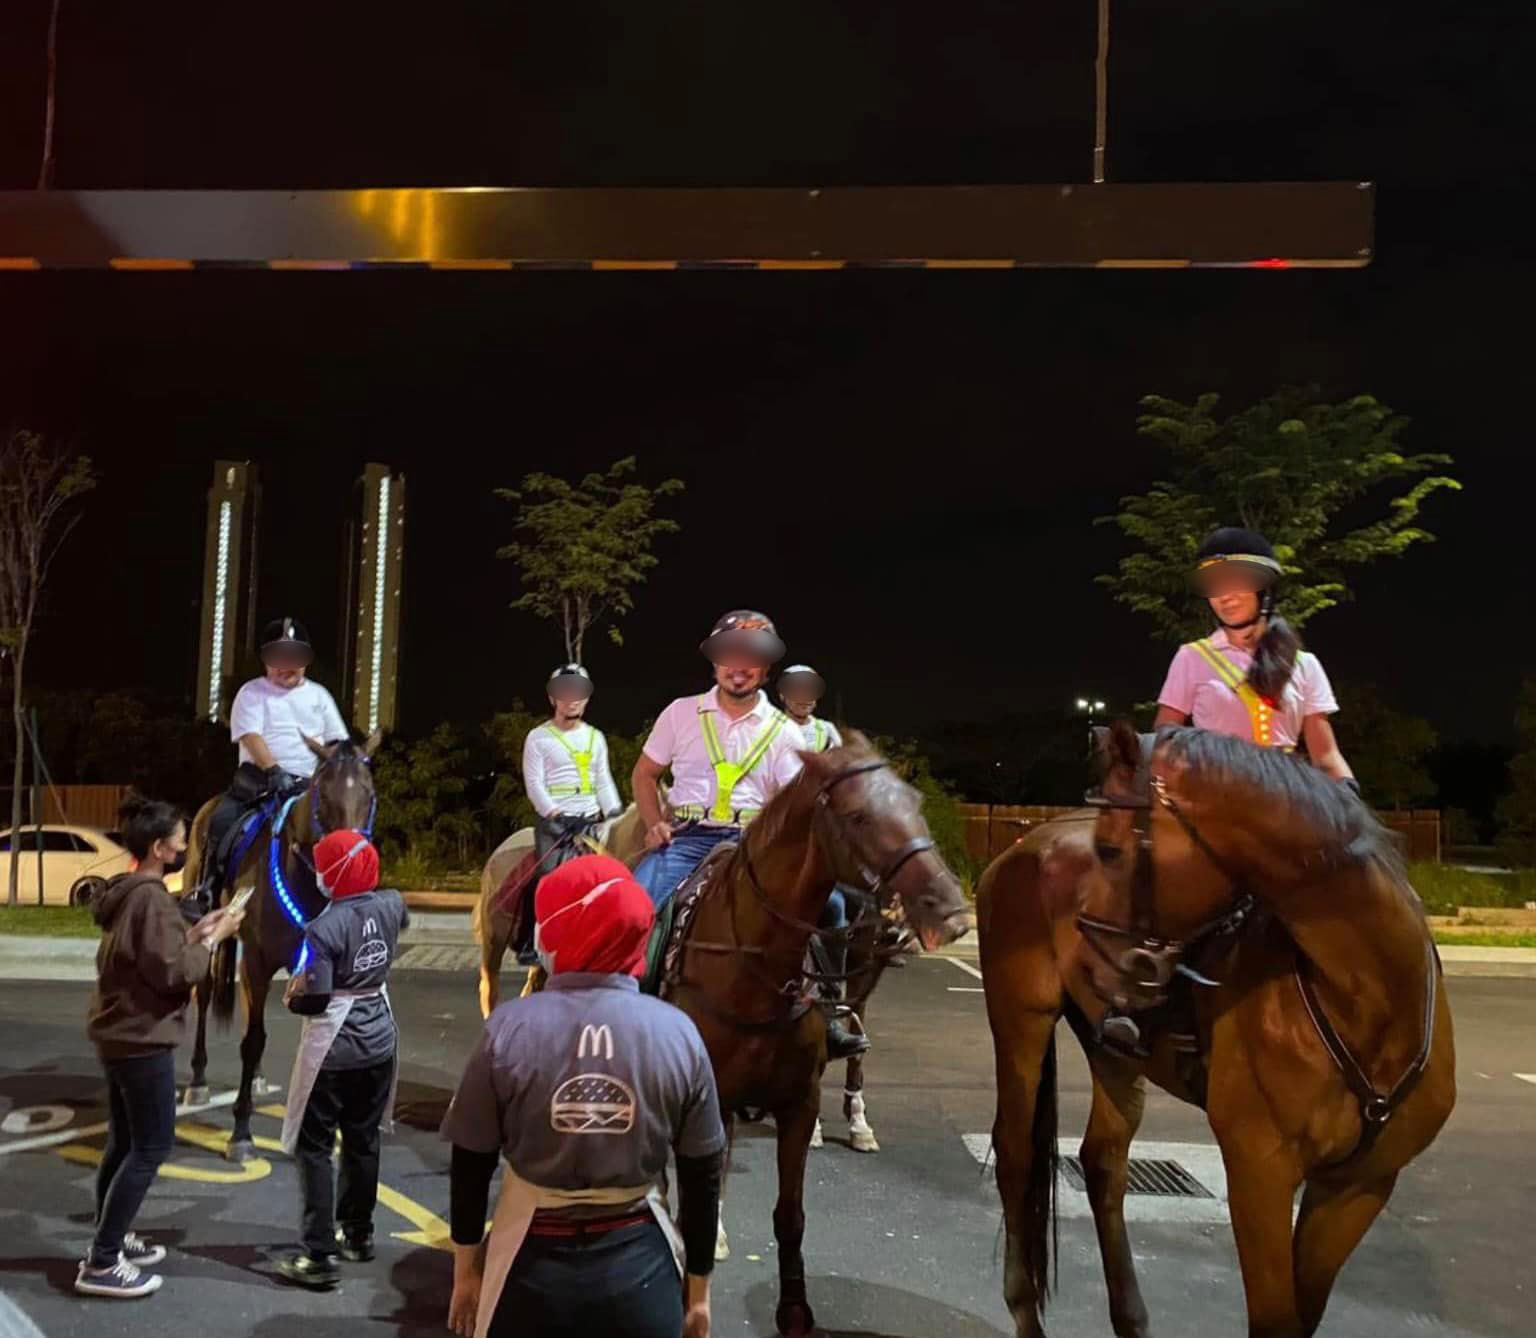 Horse riders at McDonald's without face mask